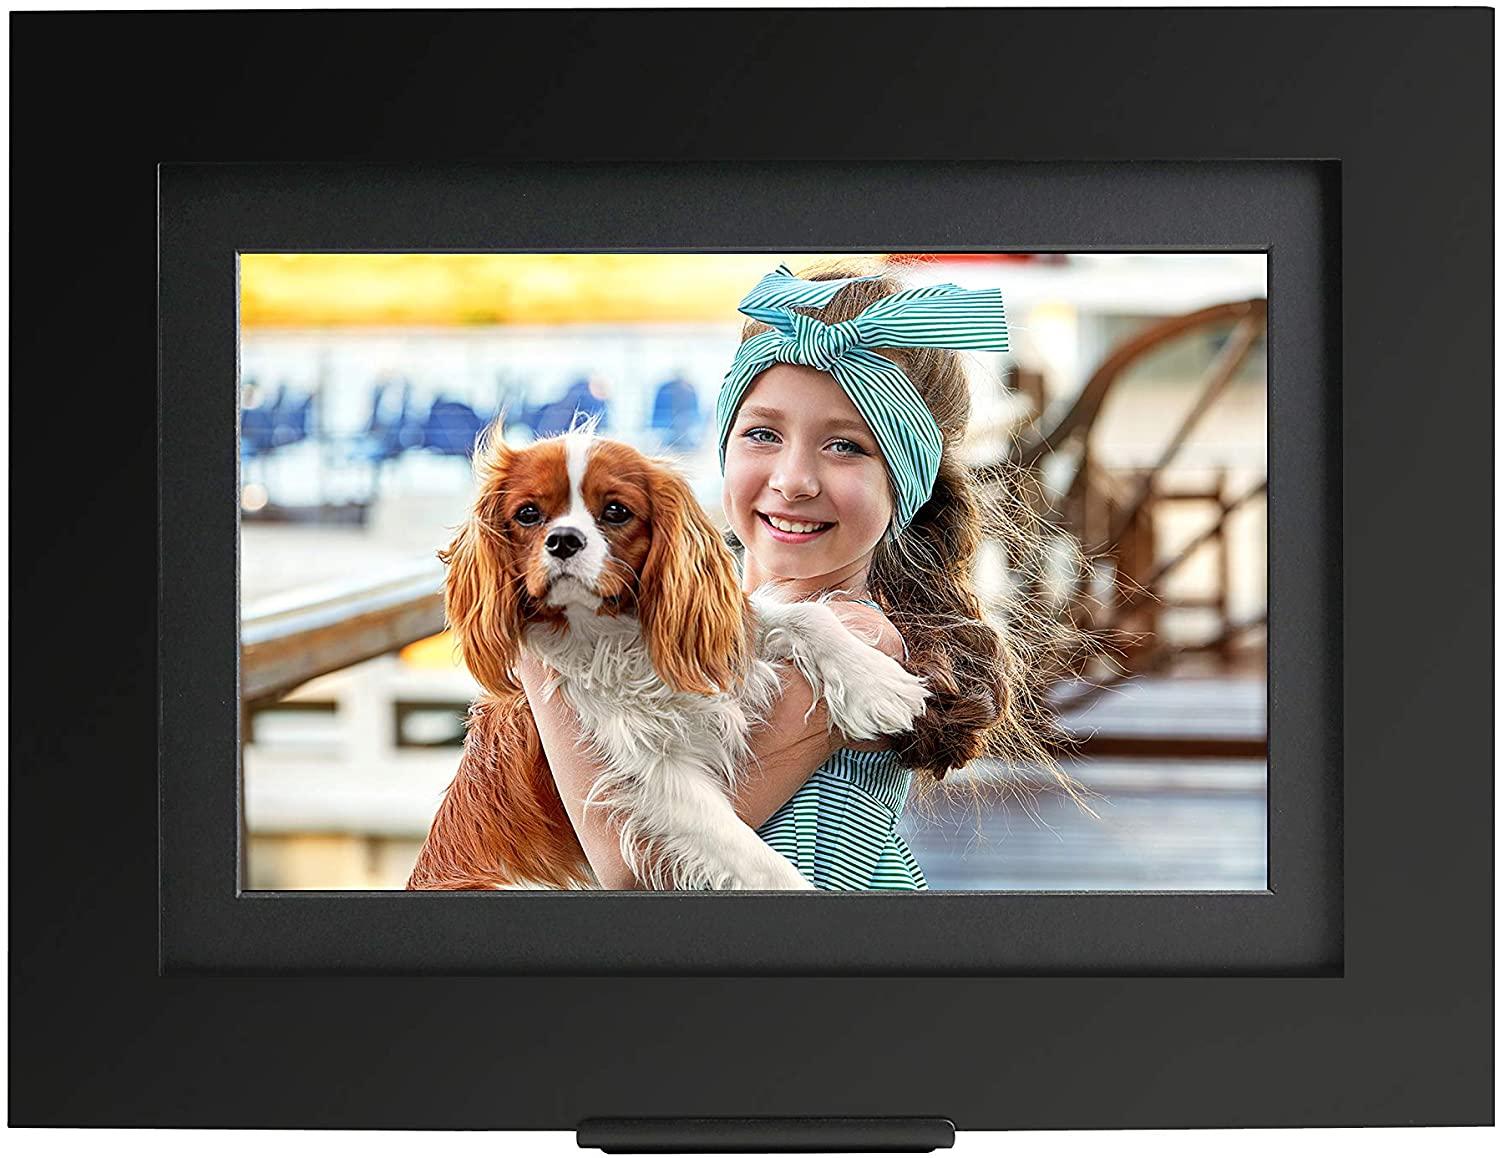 Brookstone PhotoShare Smart Digital Picture Frame for $76.99 Shipped